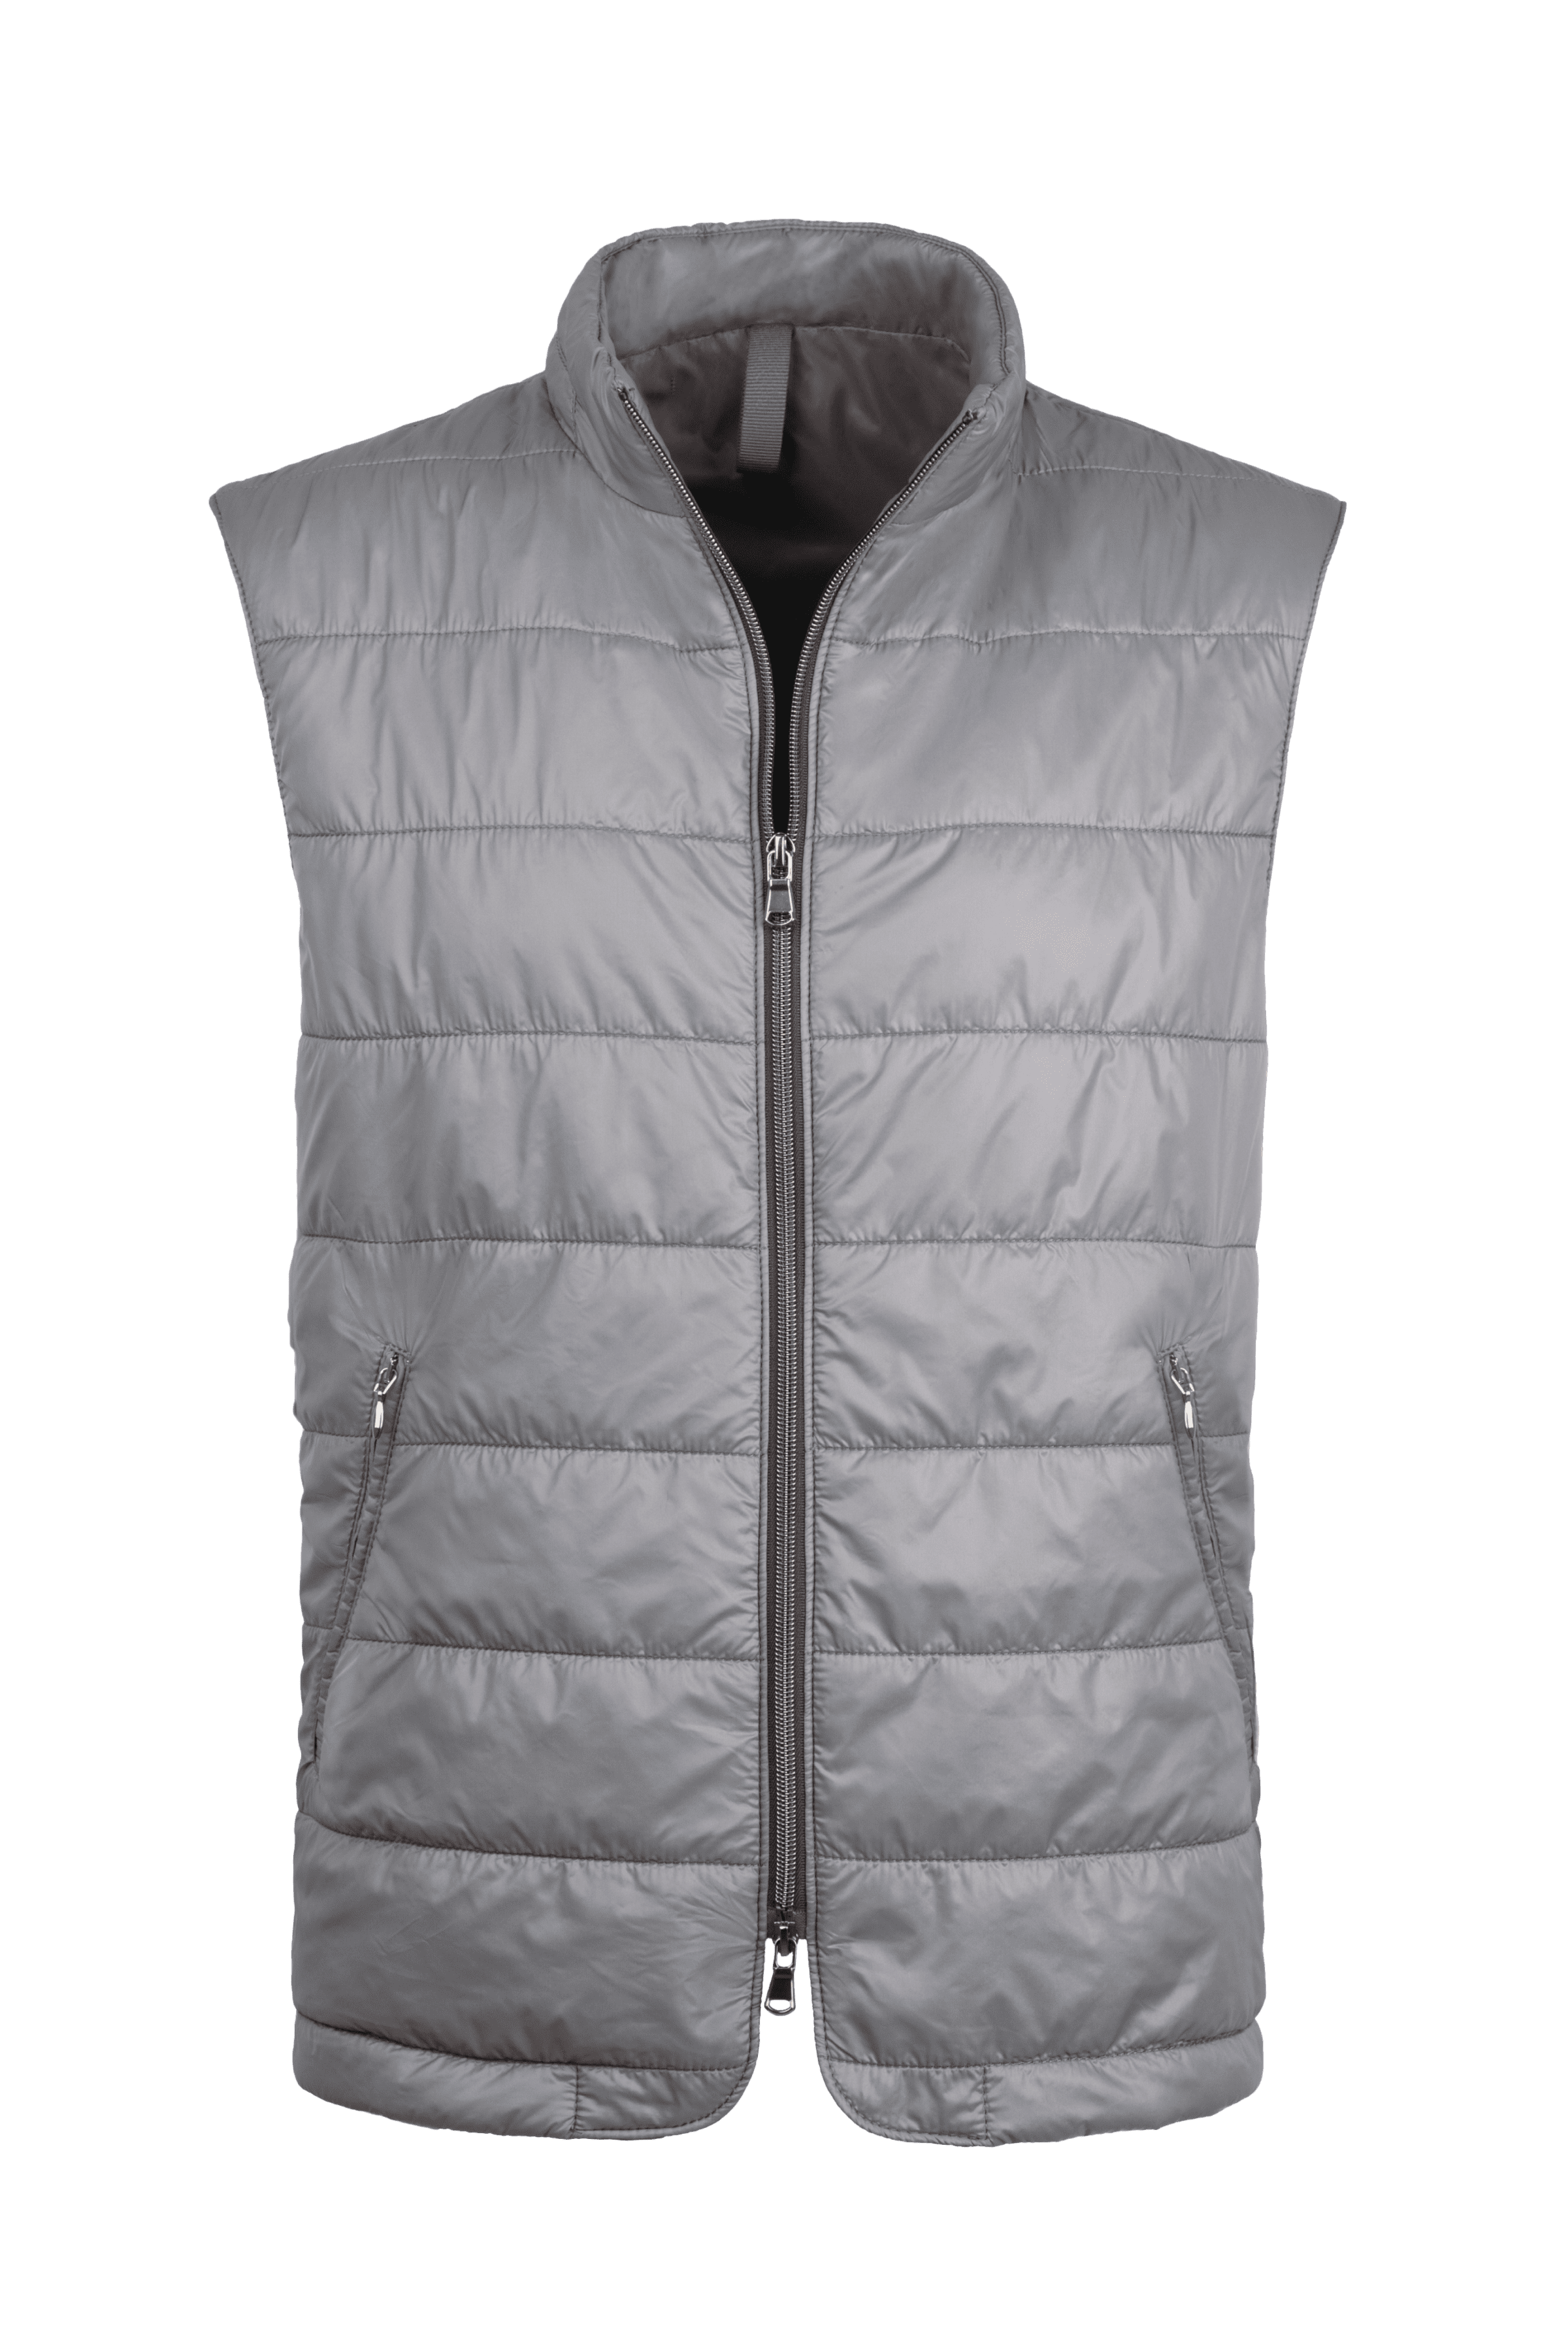 Knot Standard Grey Nylon Quilted Vest by Knot Standard